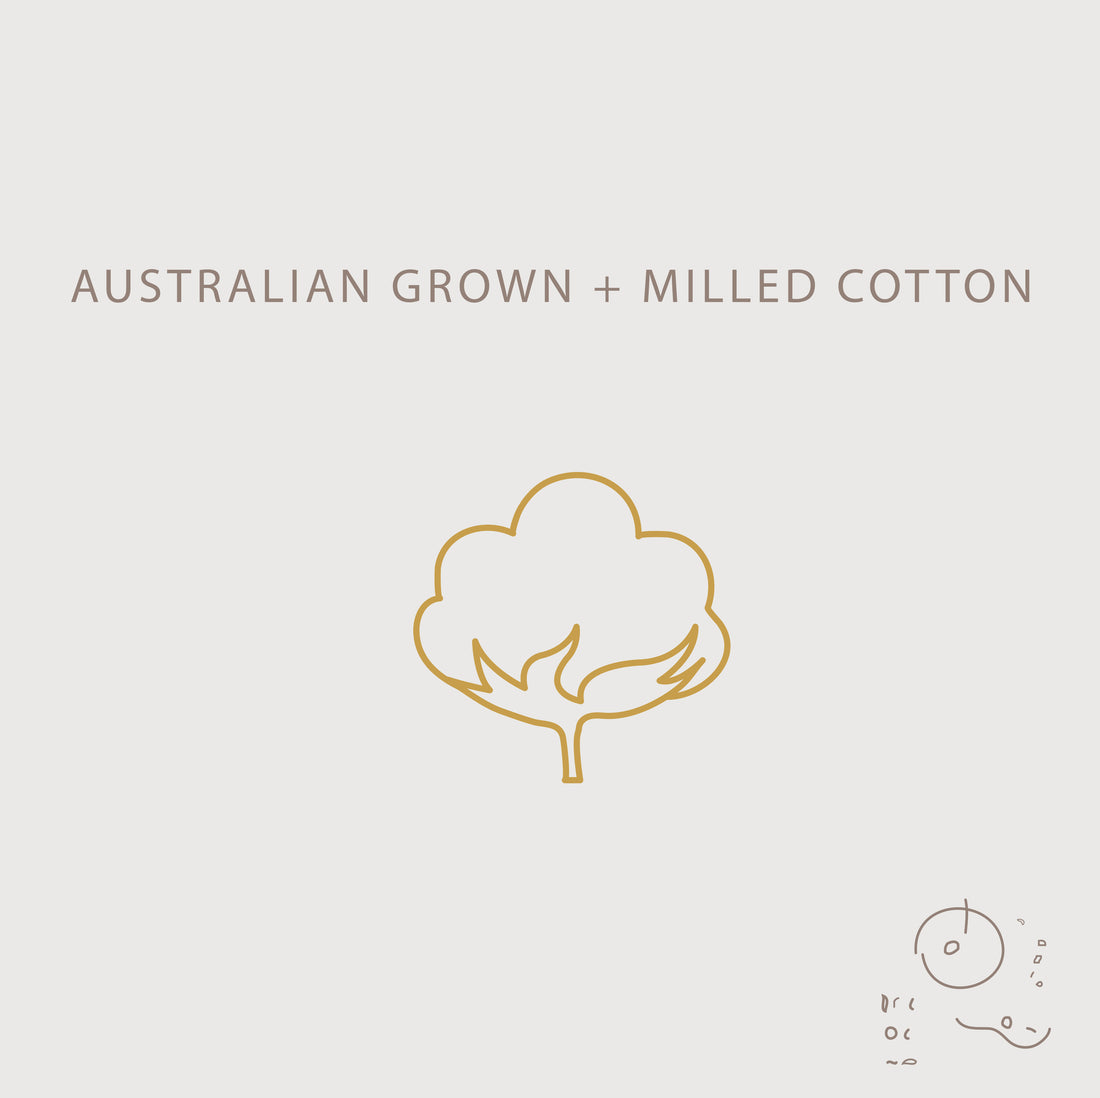 Australian grown, milled + knitted cotton